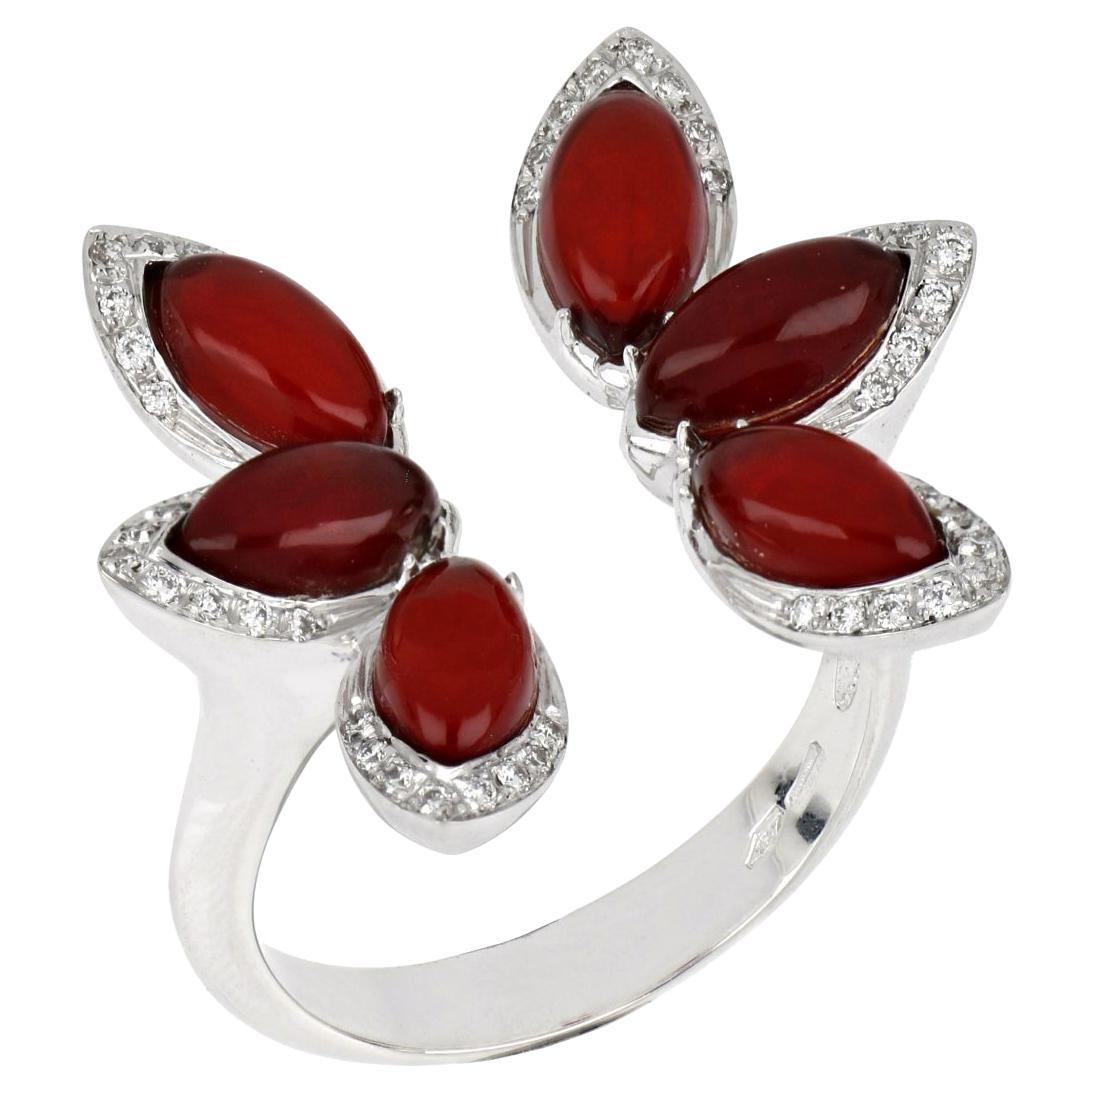 For Sale:  18kt White Gold Les Papillons Rings with Red Aventurine and Diamonds